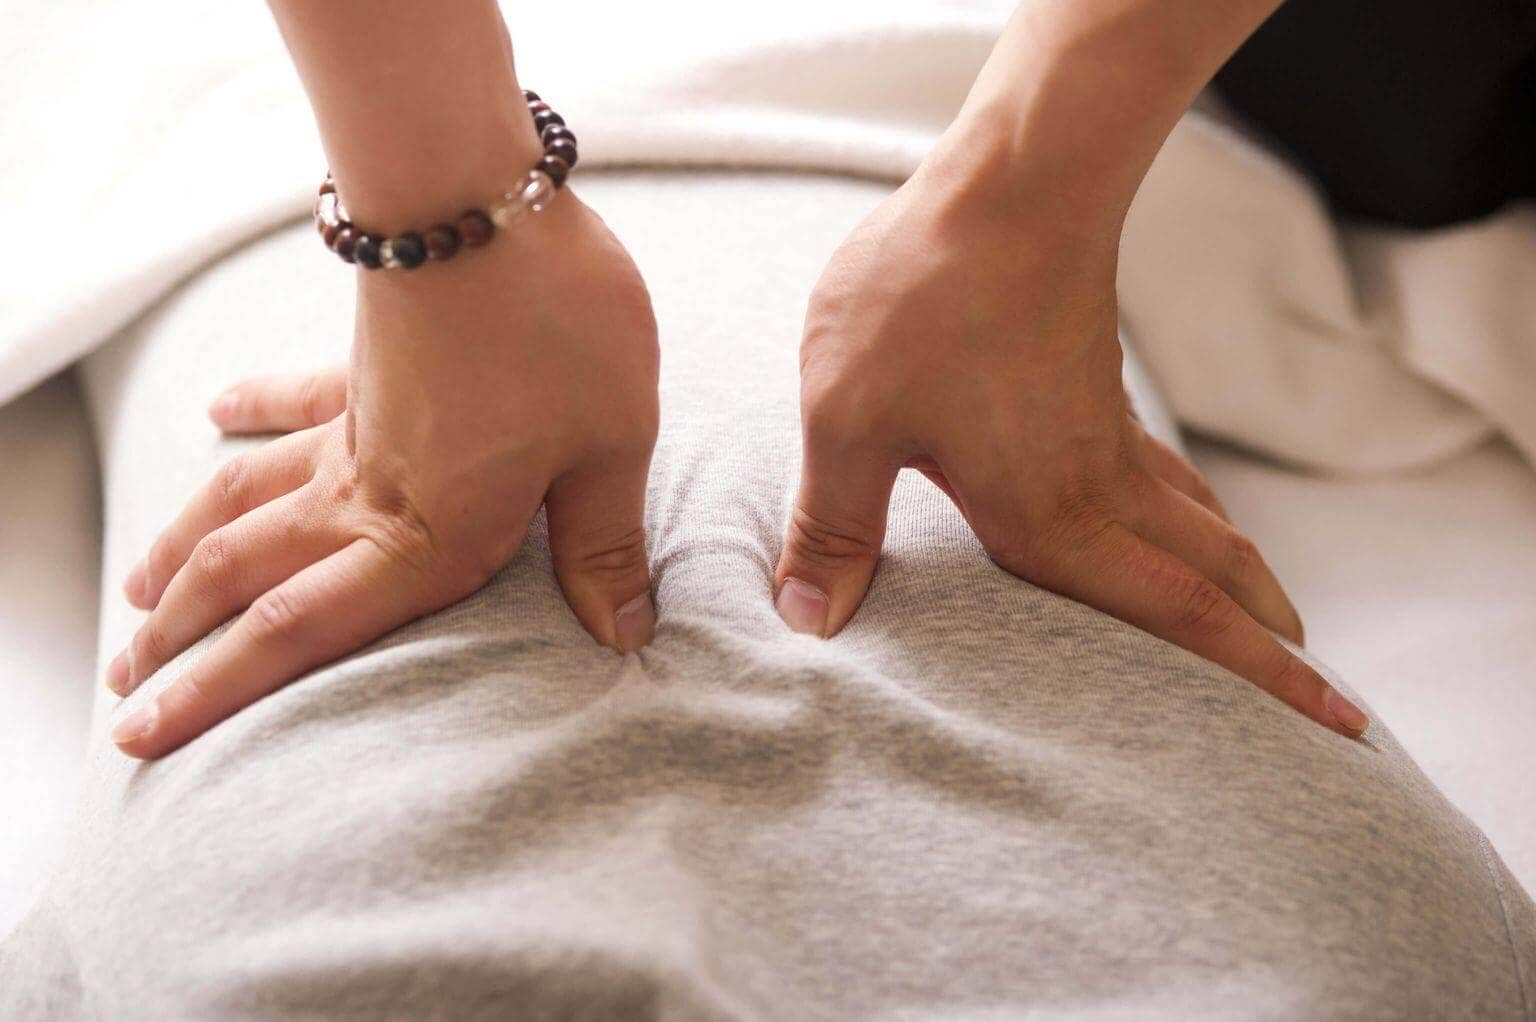 How can Shiatsu benefit your wellbeing?